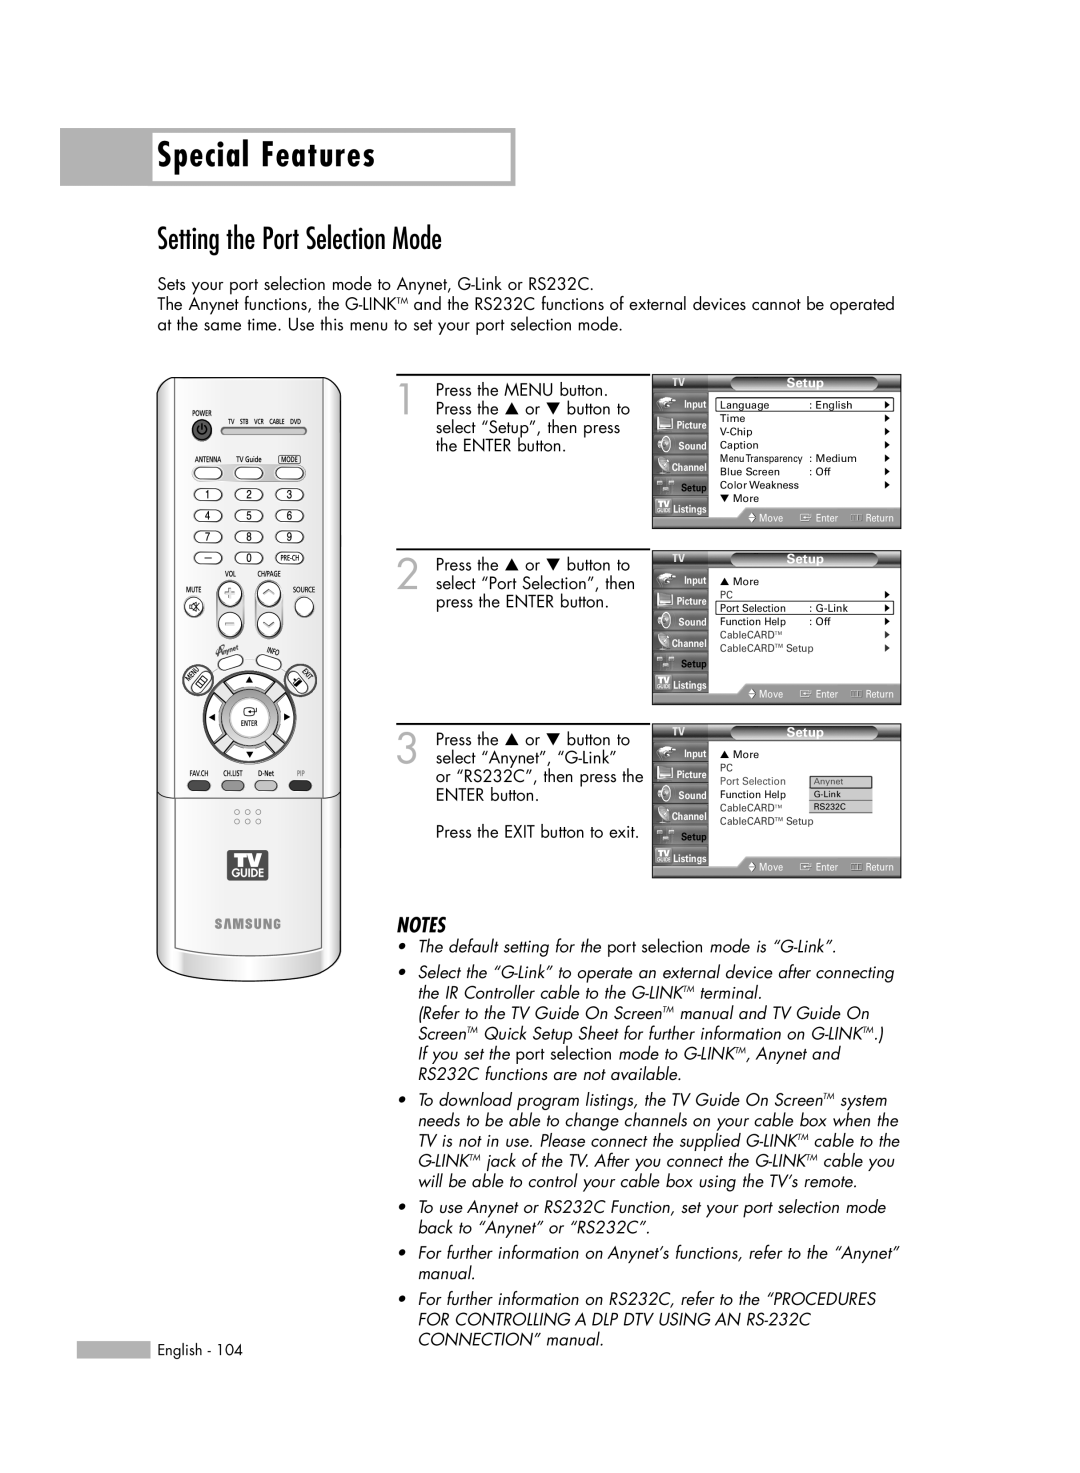 Samsung HL-R5688W manual Setting the Port Selection Mode, Special Features 